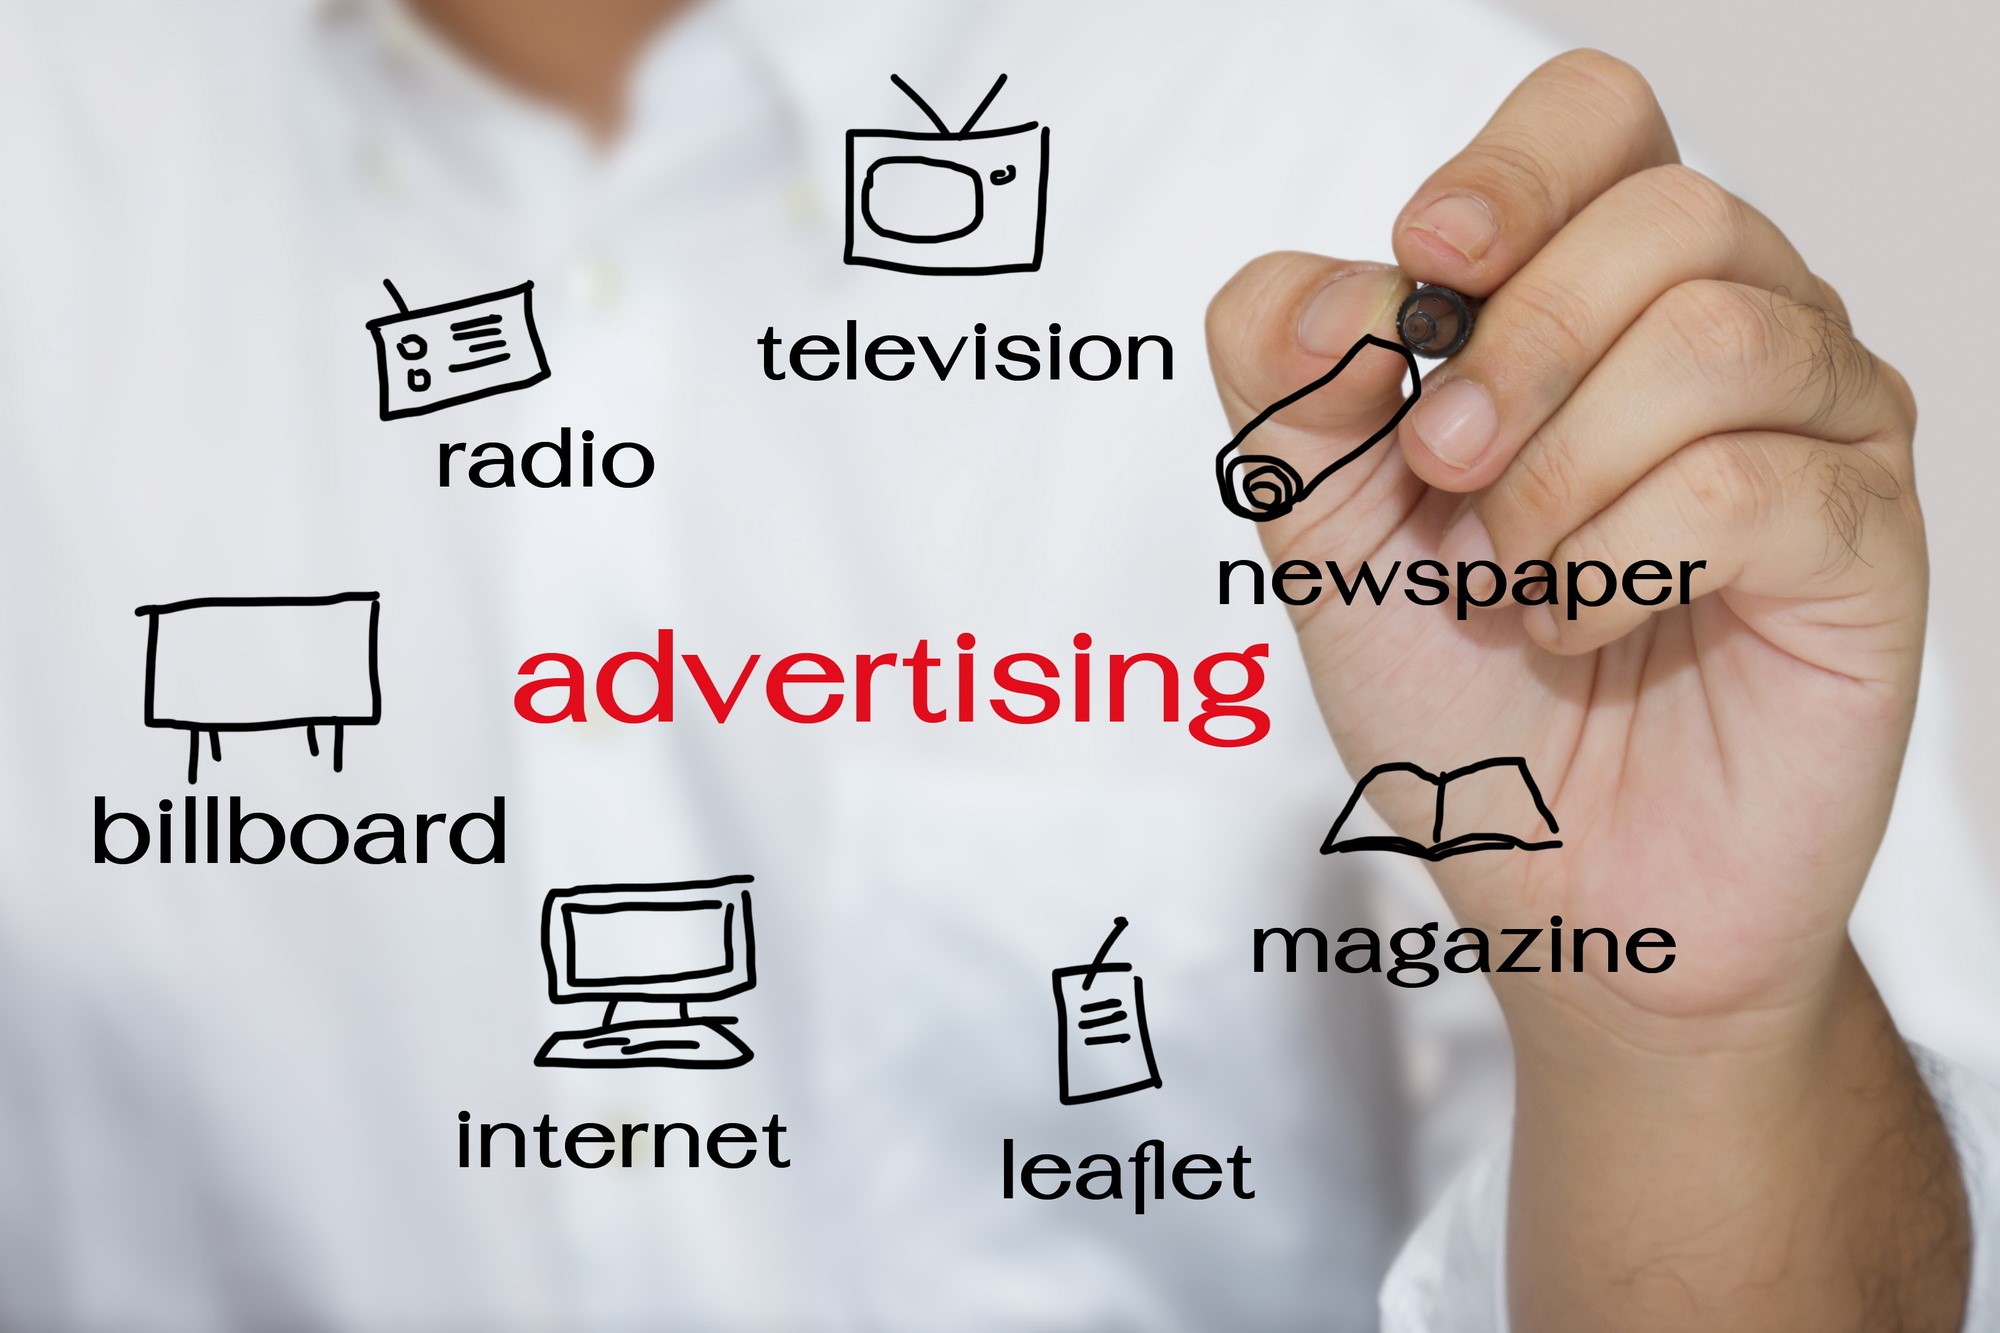 How to Create a Strong Advertising Plan for Your Business